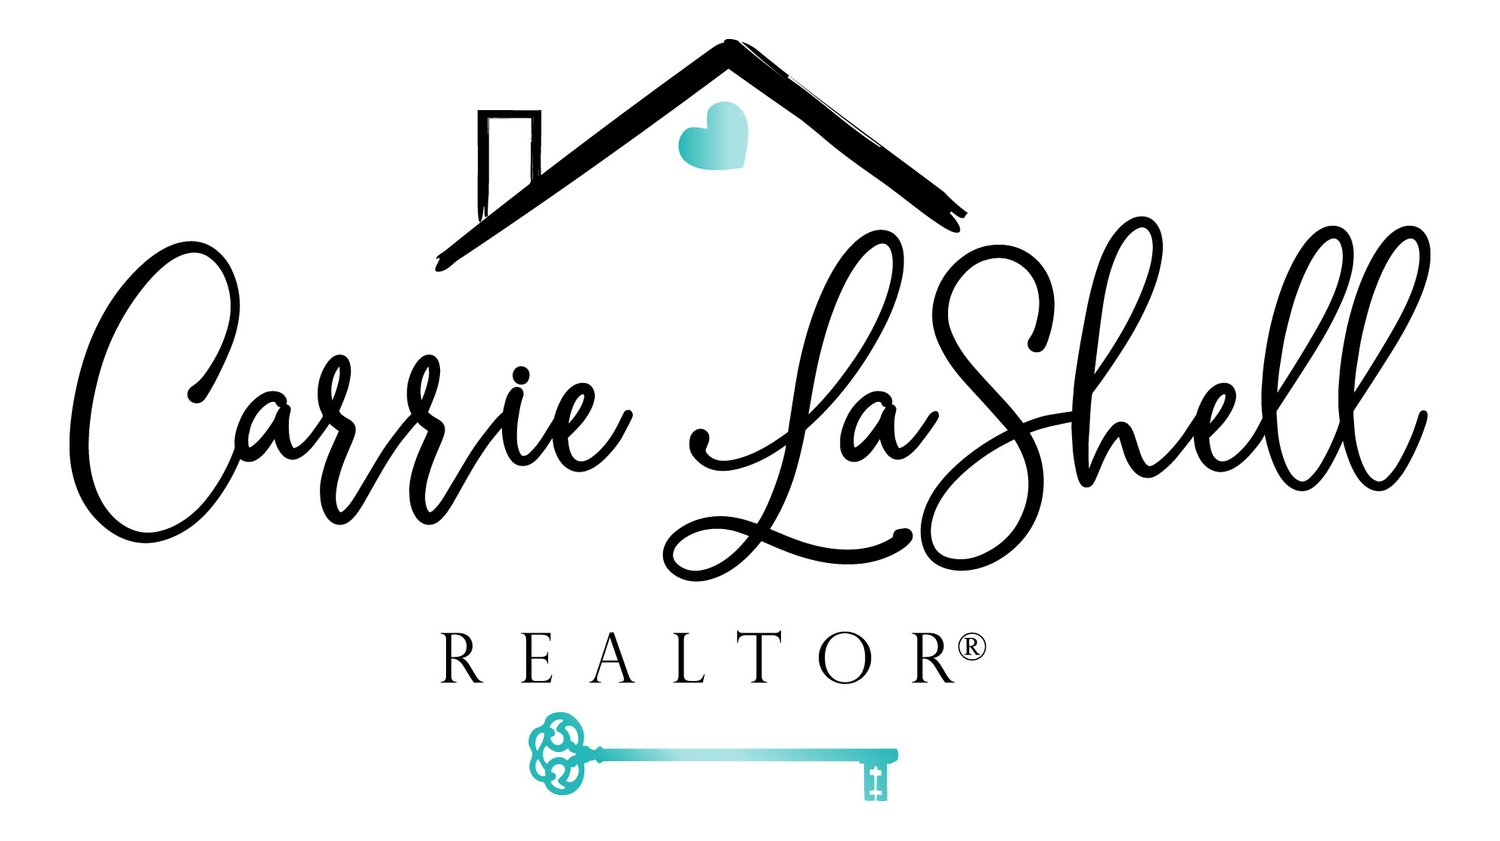 Partner With Me — Carrie Lashell Realtor